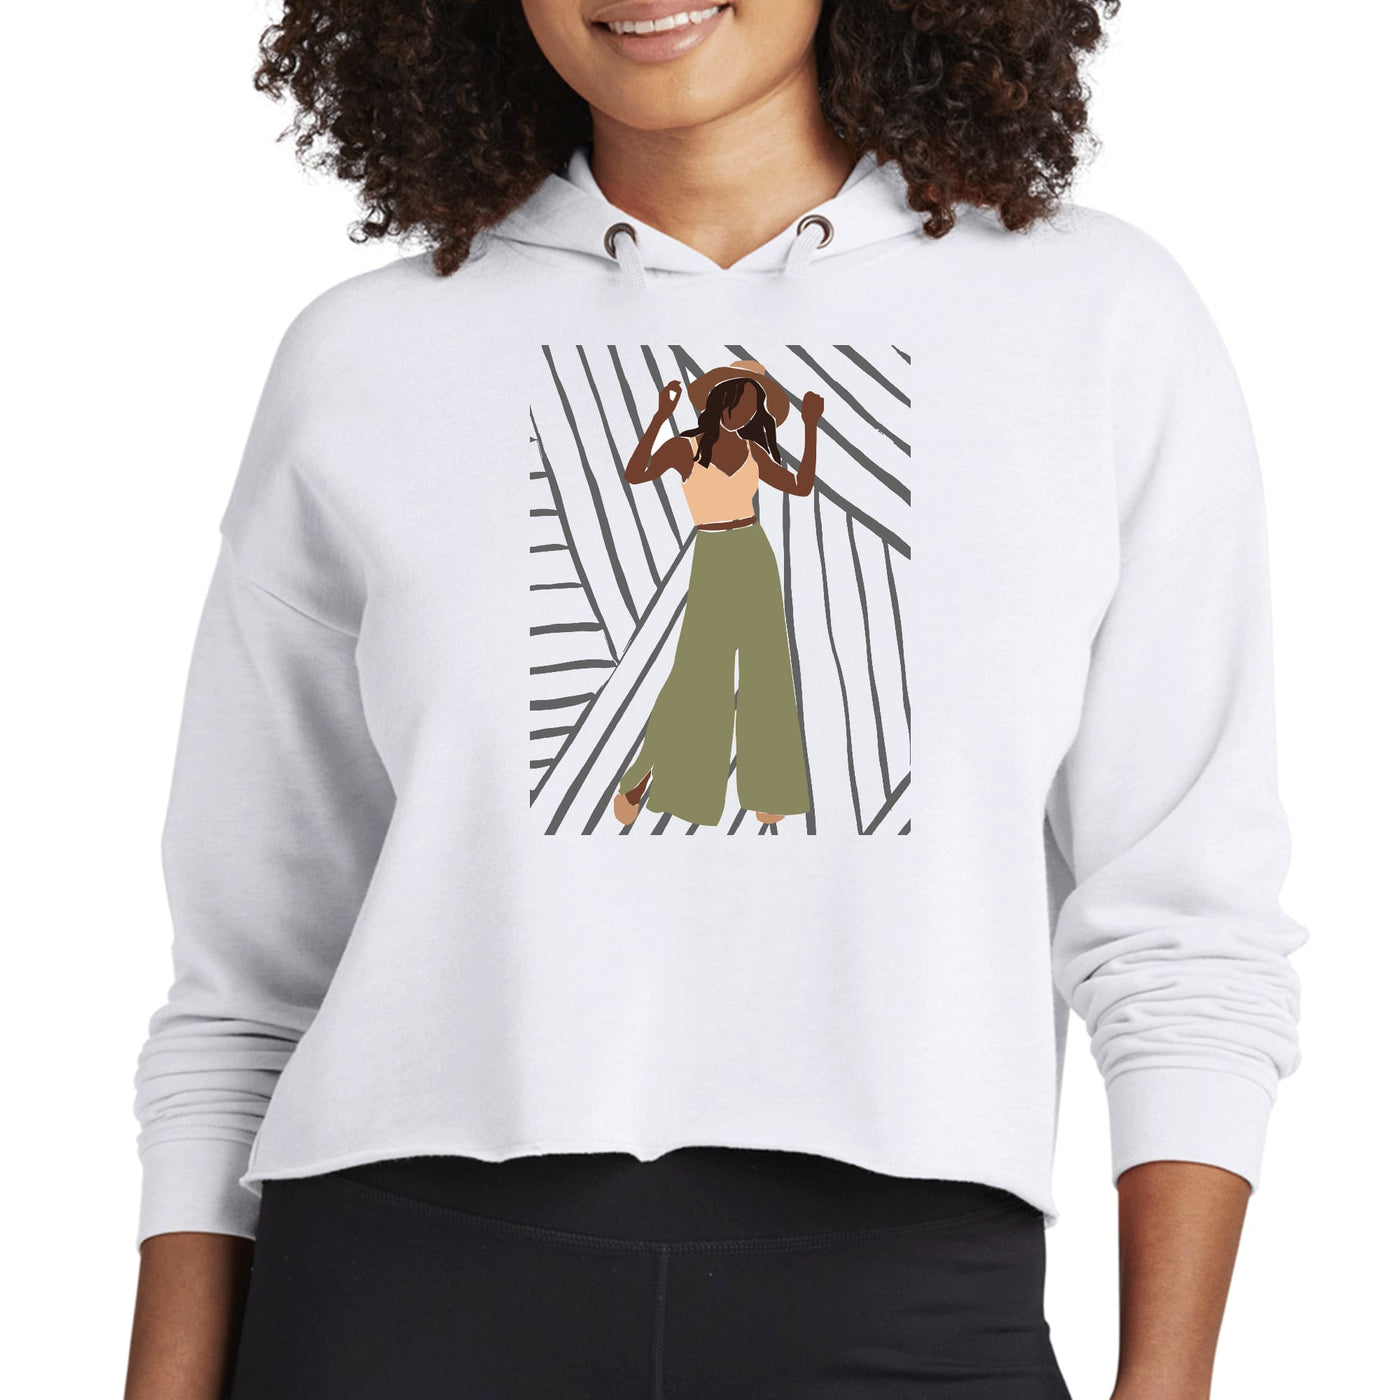 Womens Cropped Hoodie Say It Soul Its Her Groove Thing Positive - Womens